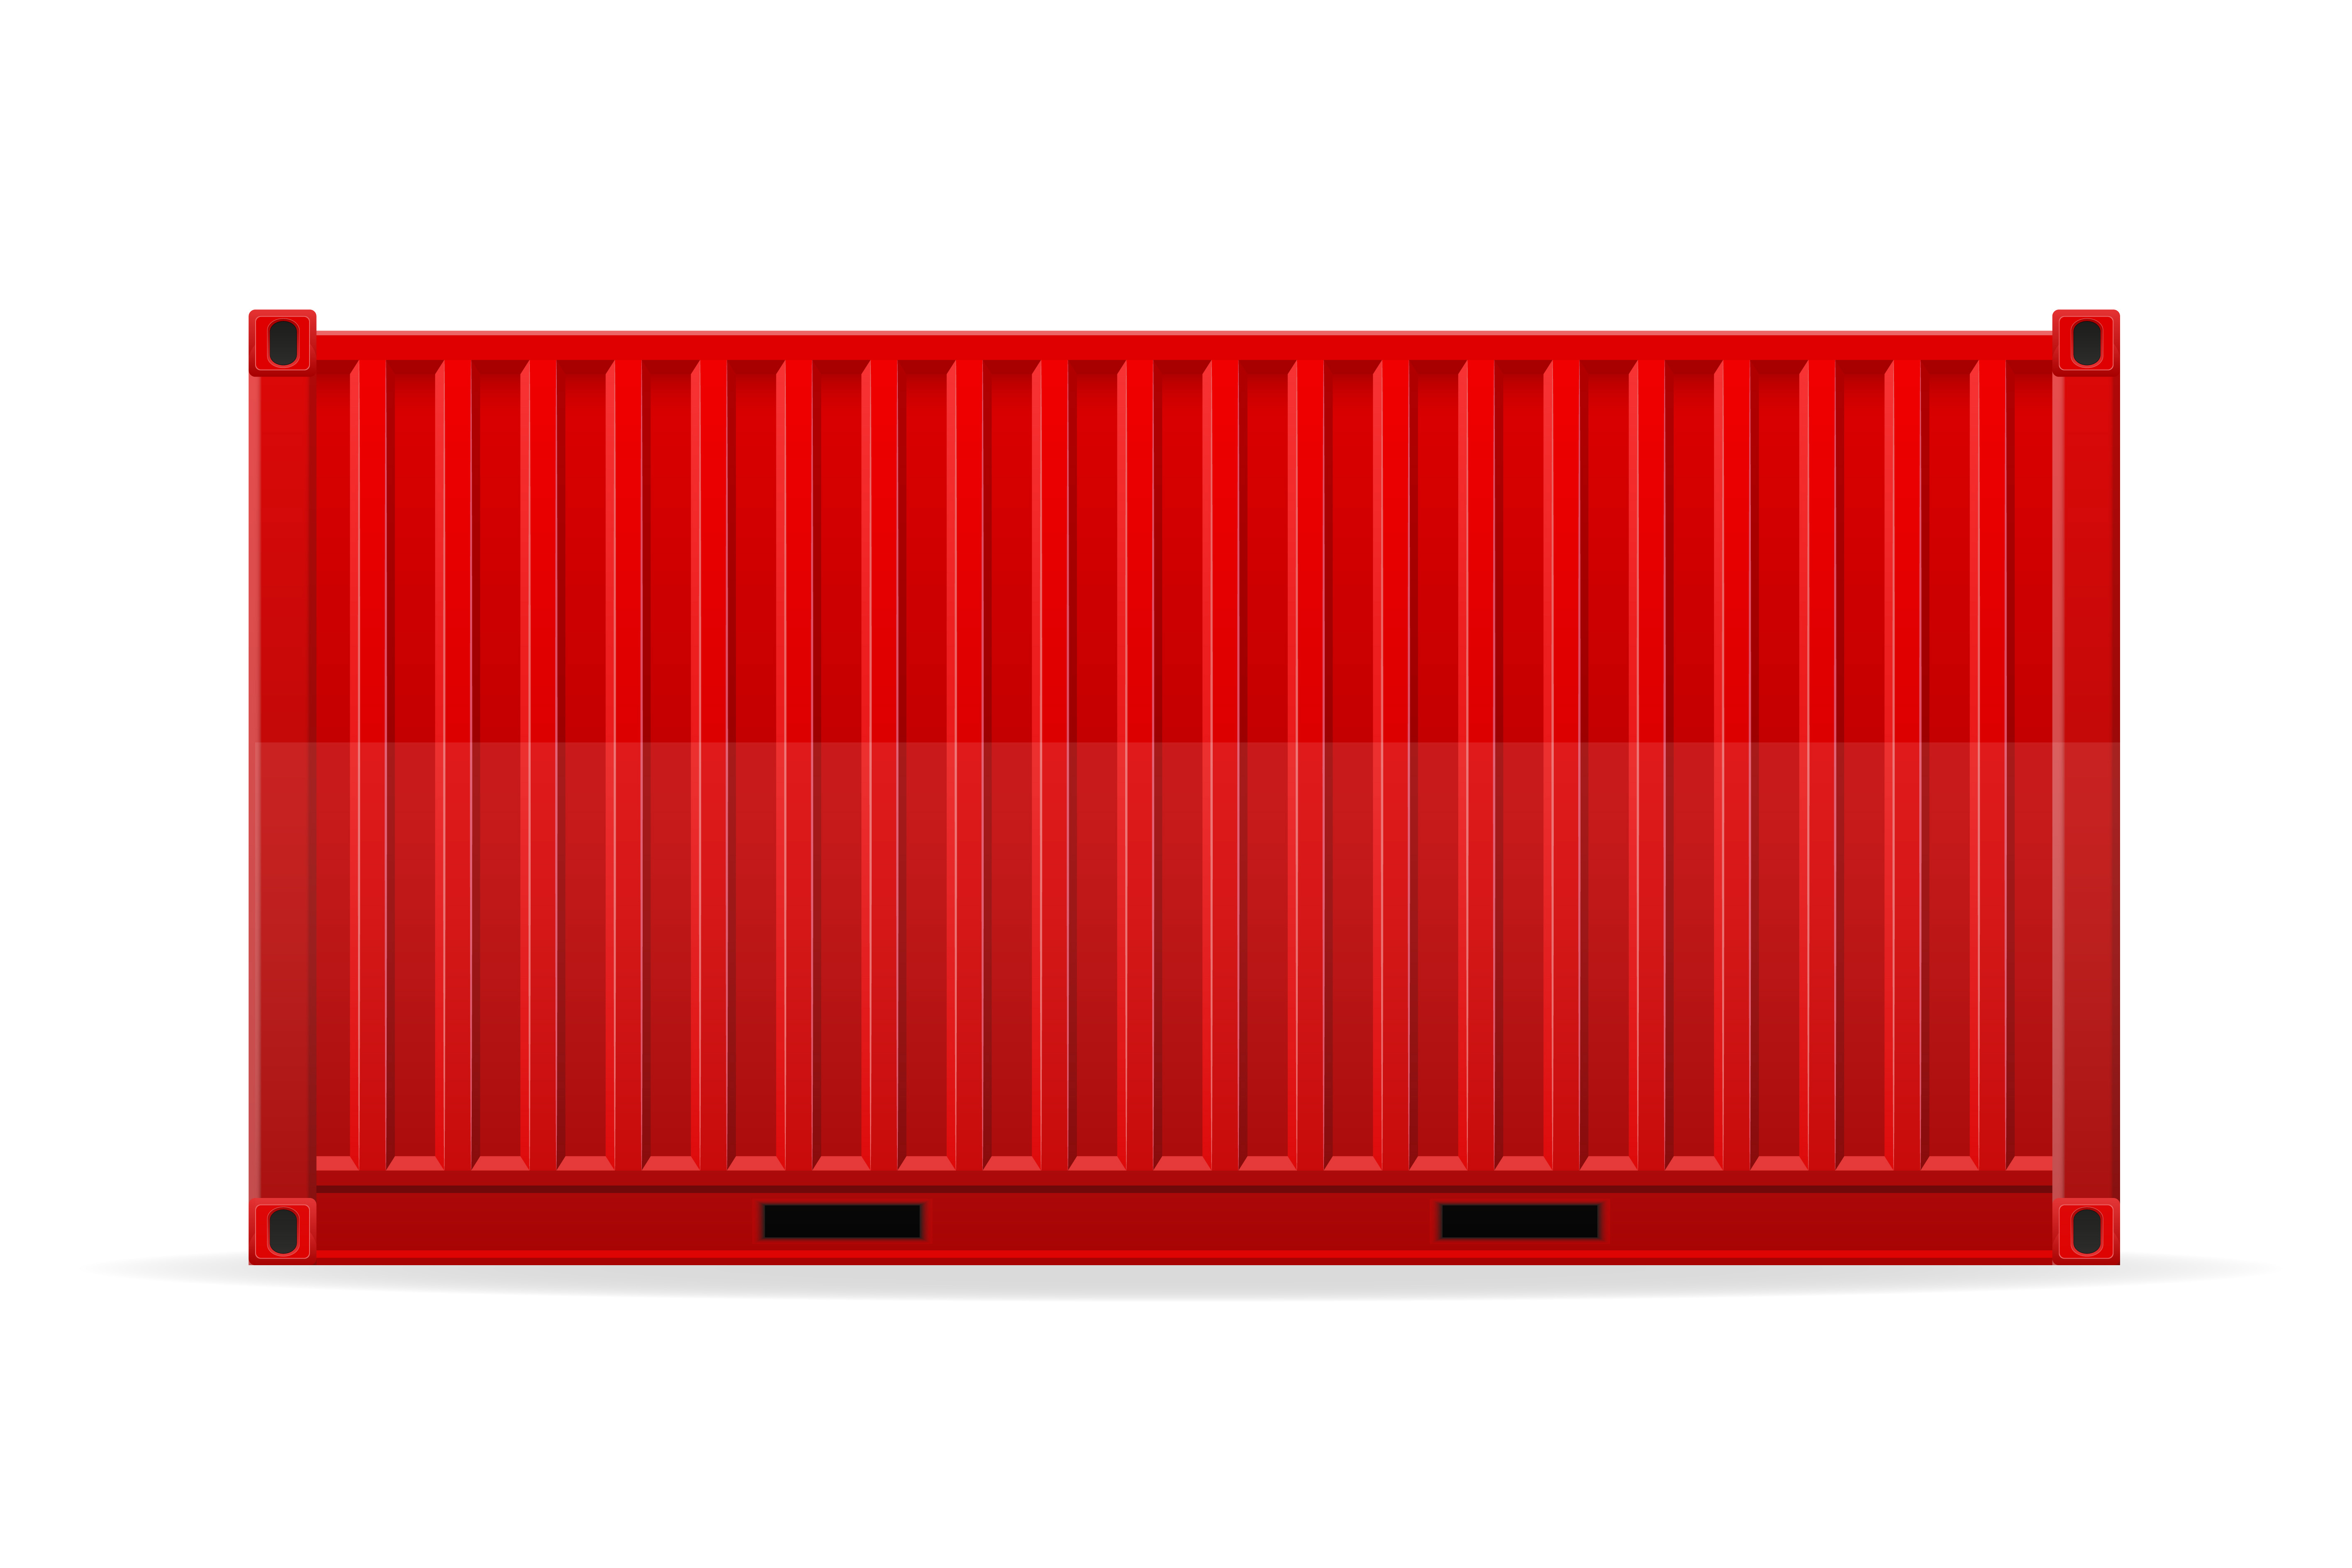 cargo container vector illustration - Download Free ...